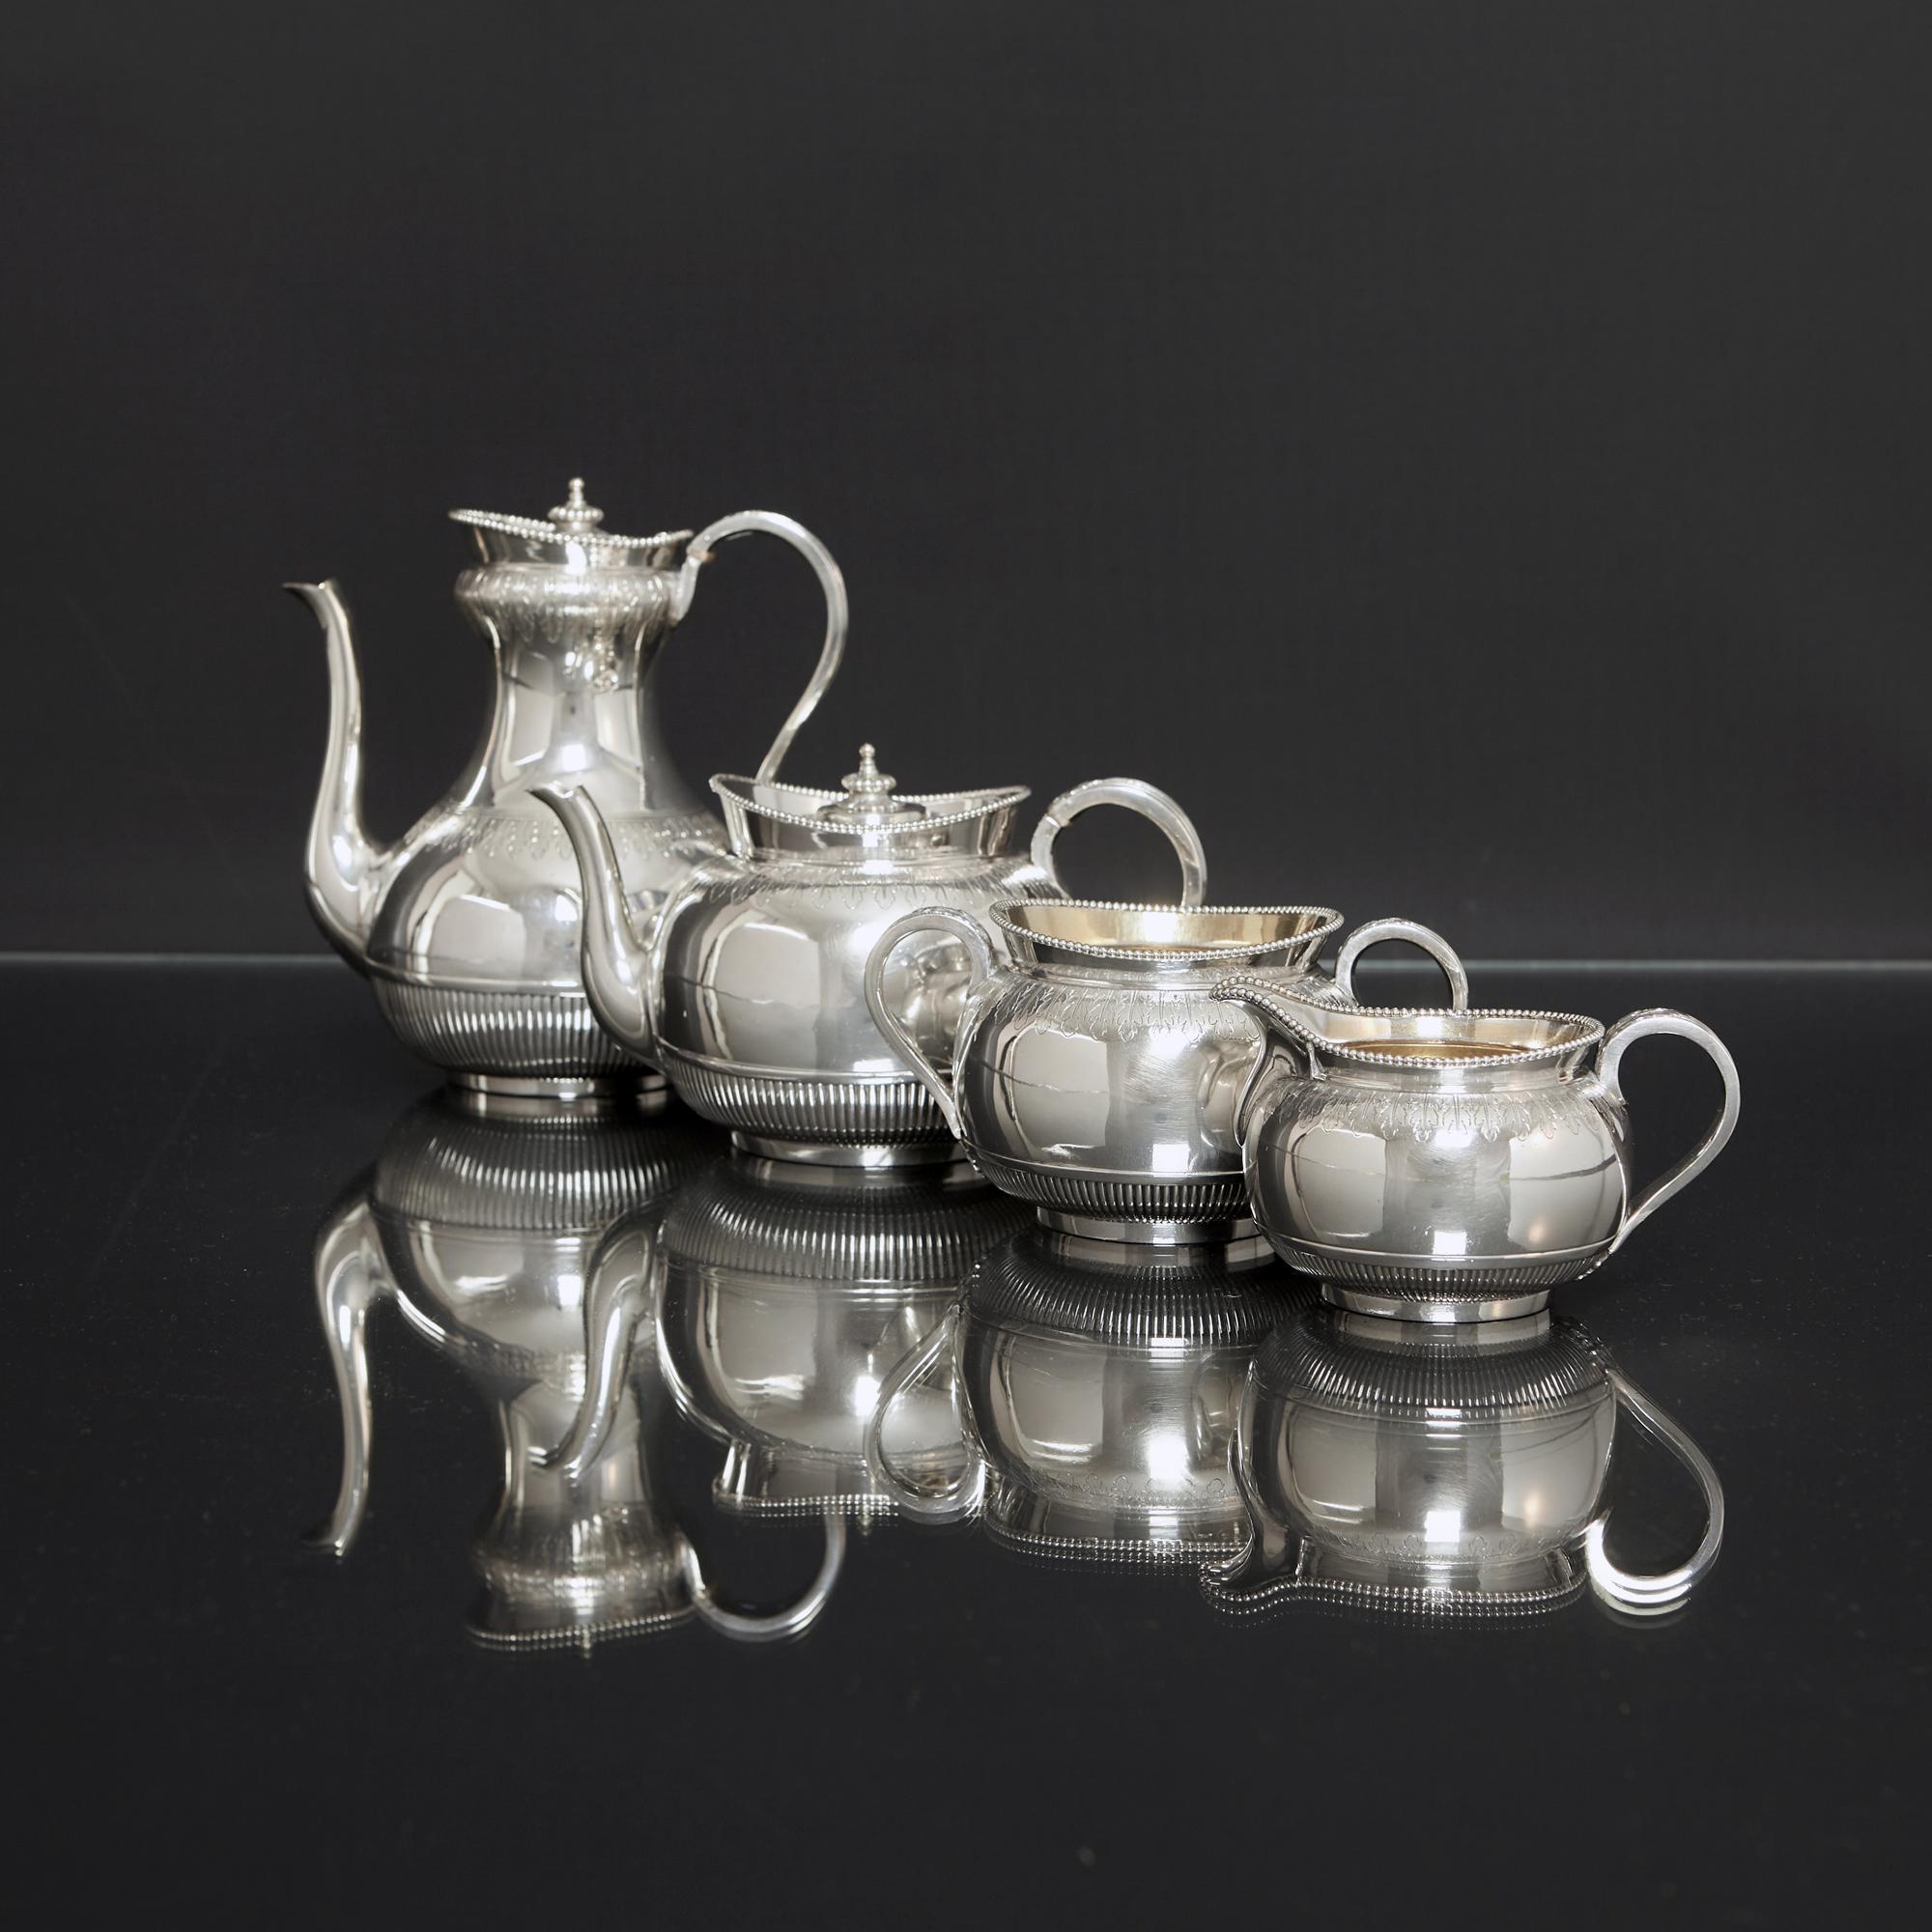 Smart four-piece Victorian antique silver tea and coffee set. Each piece is hand chased and engraved with acanthus leaf aprons, fine fluting around the base of the body, and an elegant bead pattern rim. The hinged covers of the silver tea and coffee